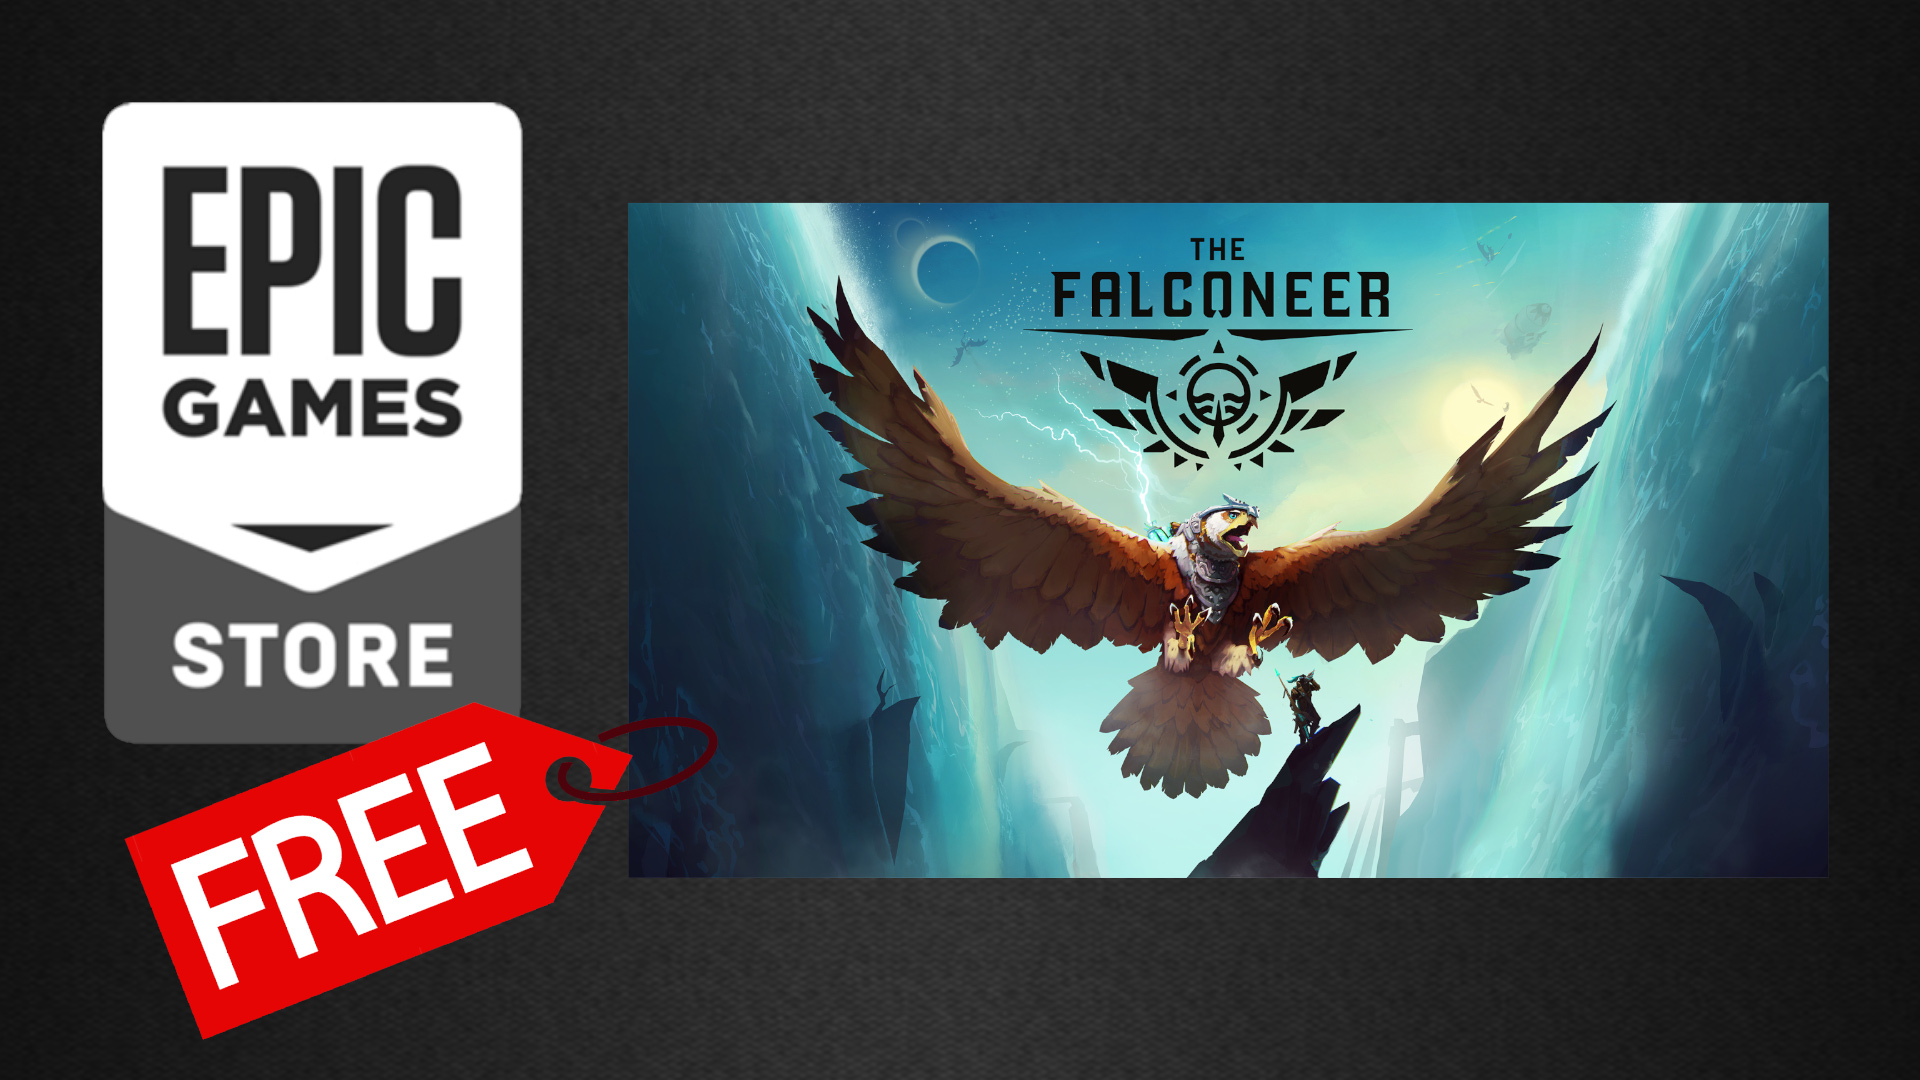 Epic Games Store's Free Game is The Falconeer